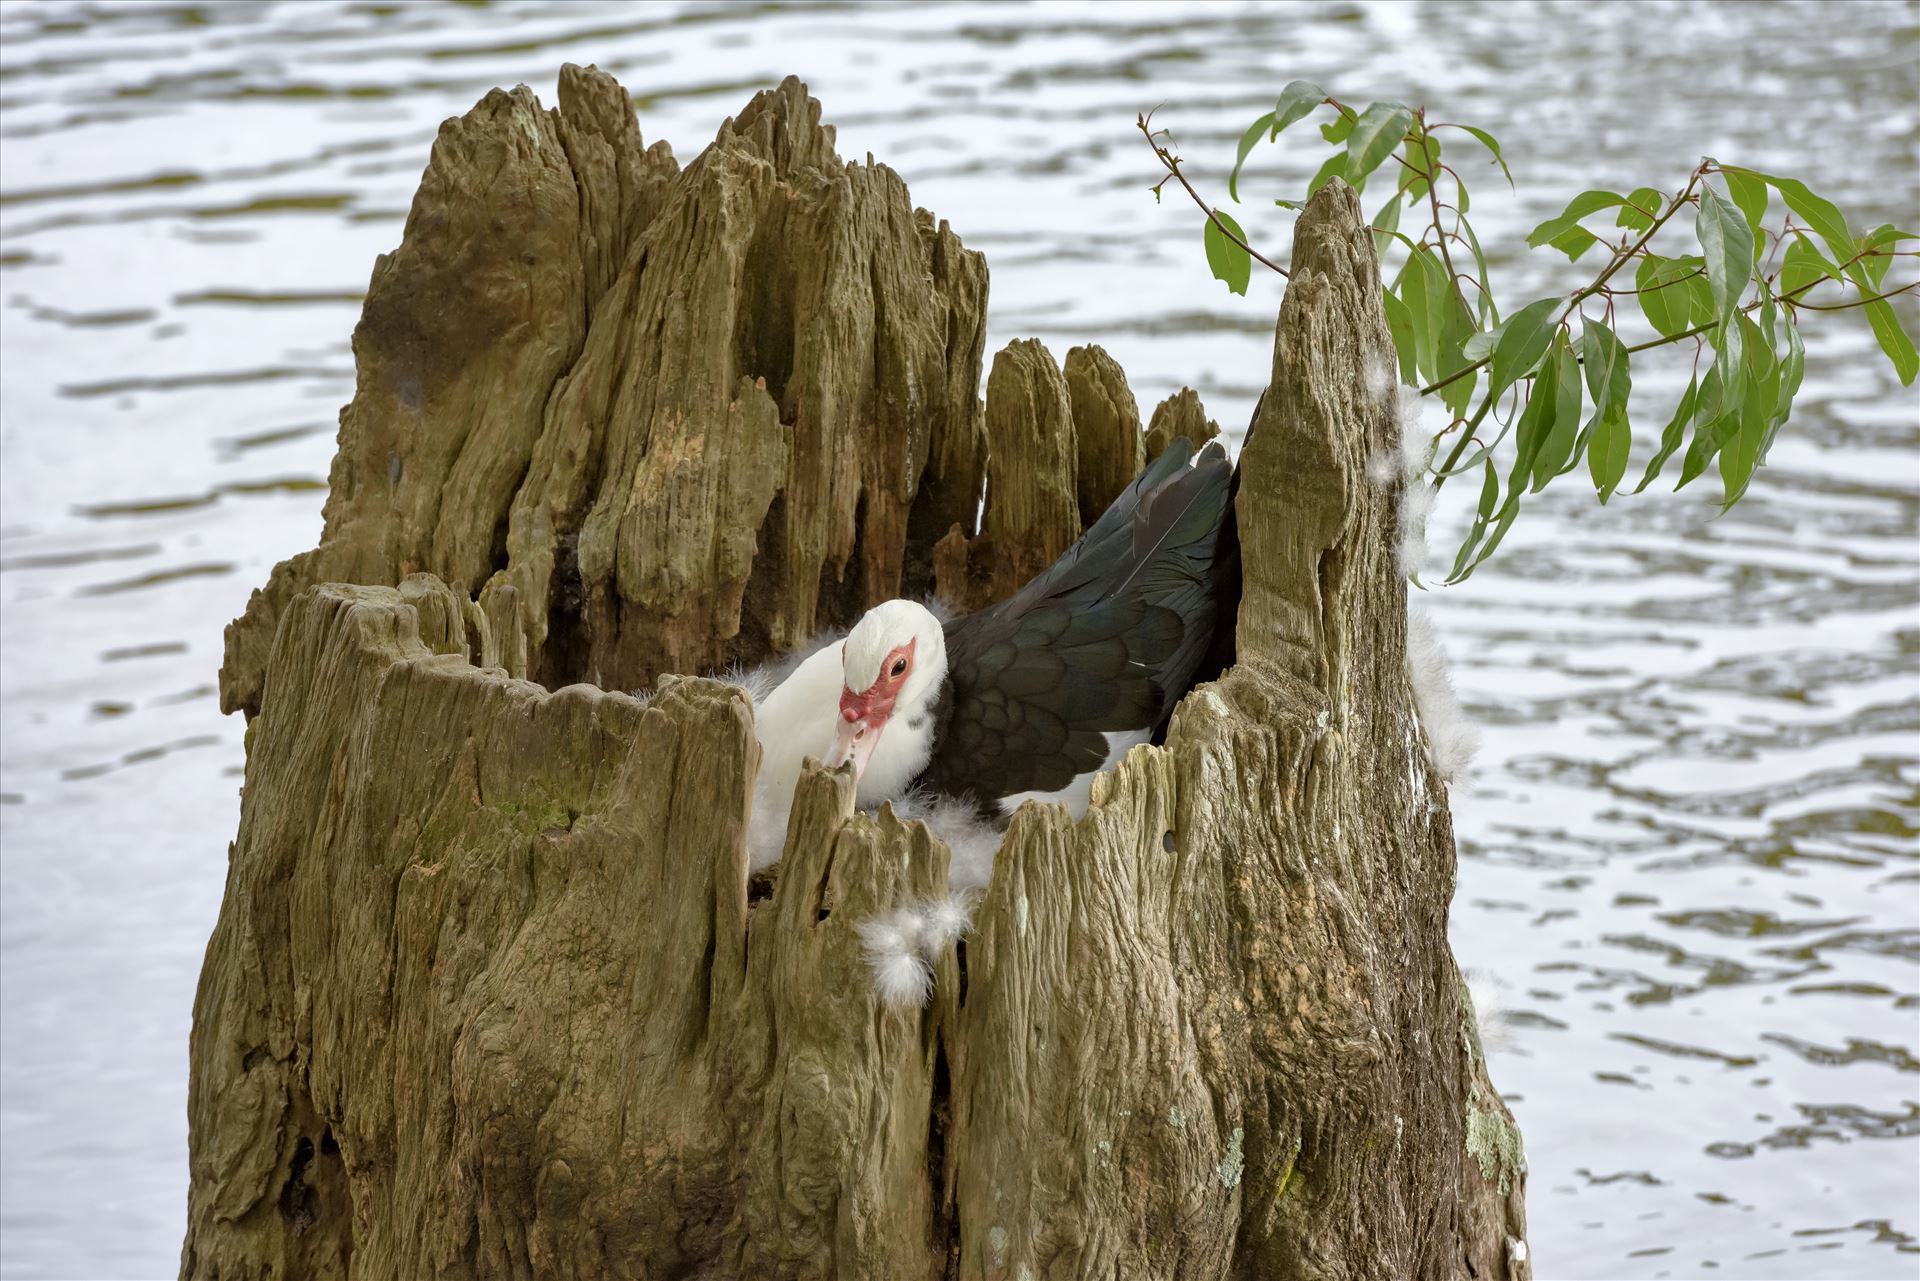 duck sitting on eggs in hollowed out tree stump lake caroline ss alamy 8106732.jpg -  by Terry Kelly Photography